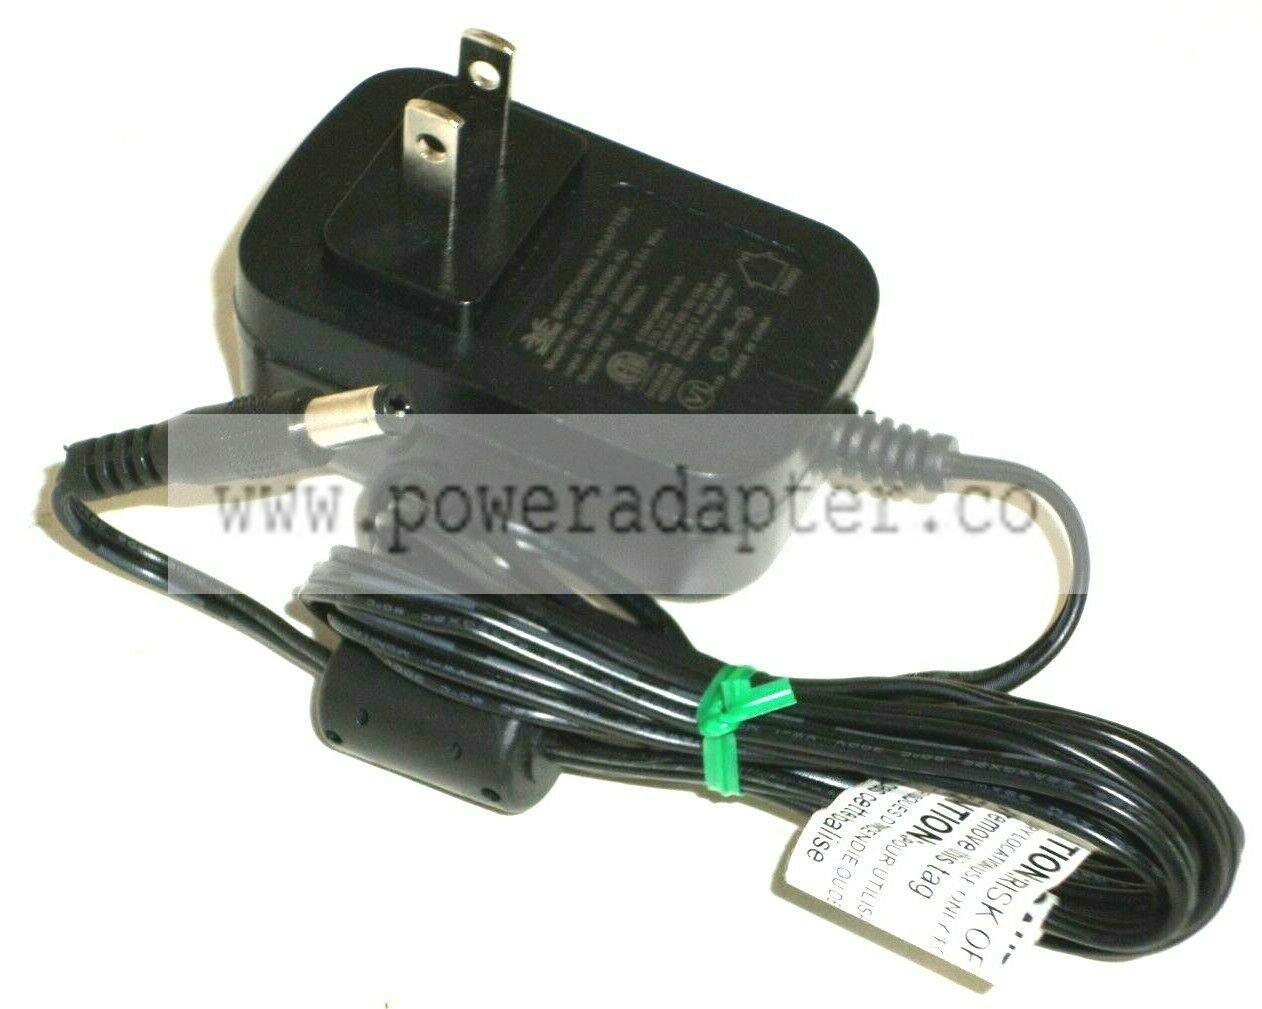 3YE Switching Power Supply AC Adapter 19V 500mA P/N GQ12-190060-AU Type: AC/AC Adapter Output Voltage: 19 V MPN: GQ